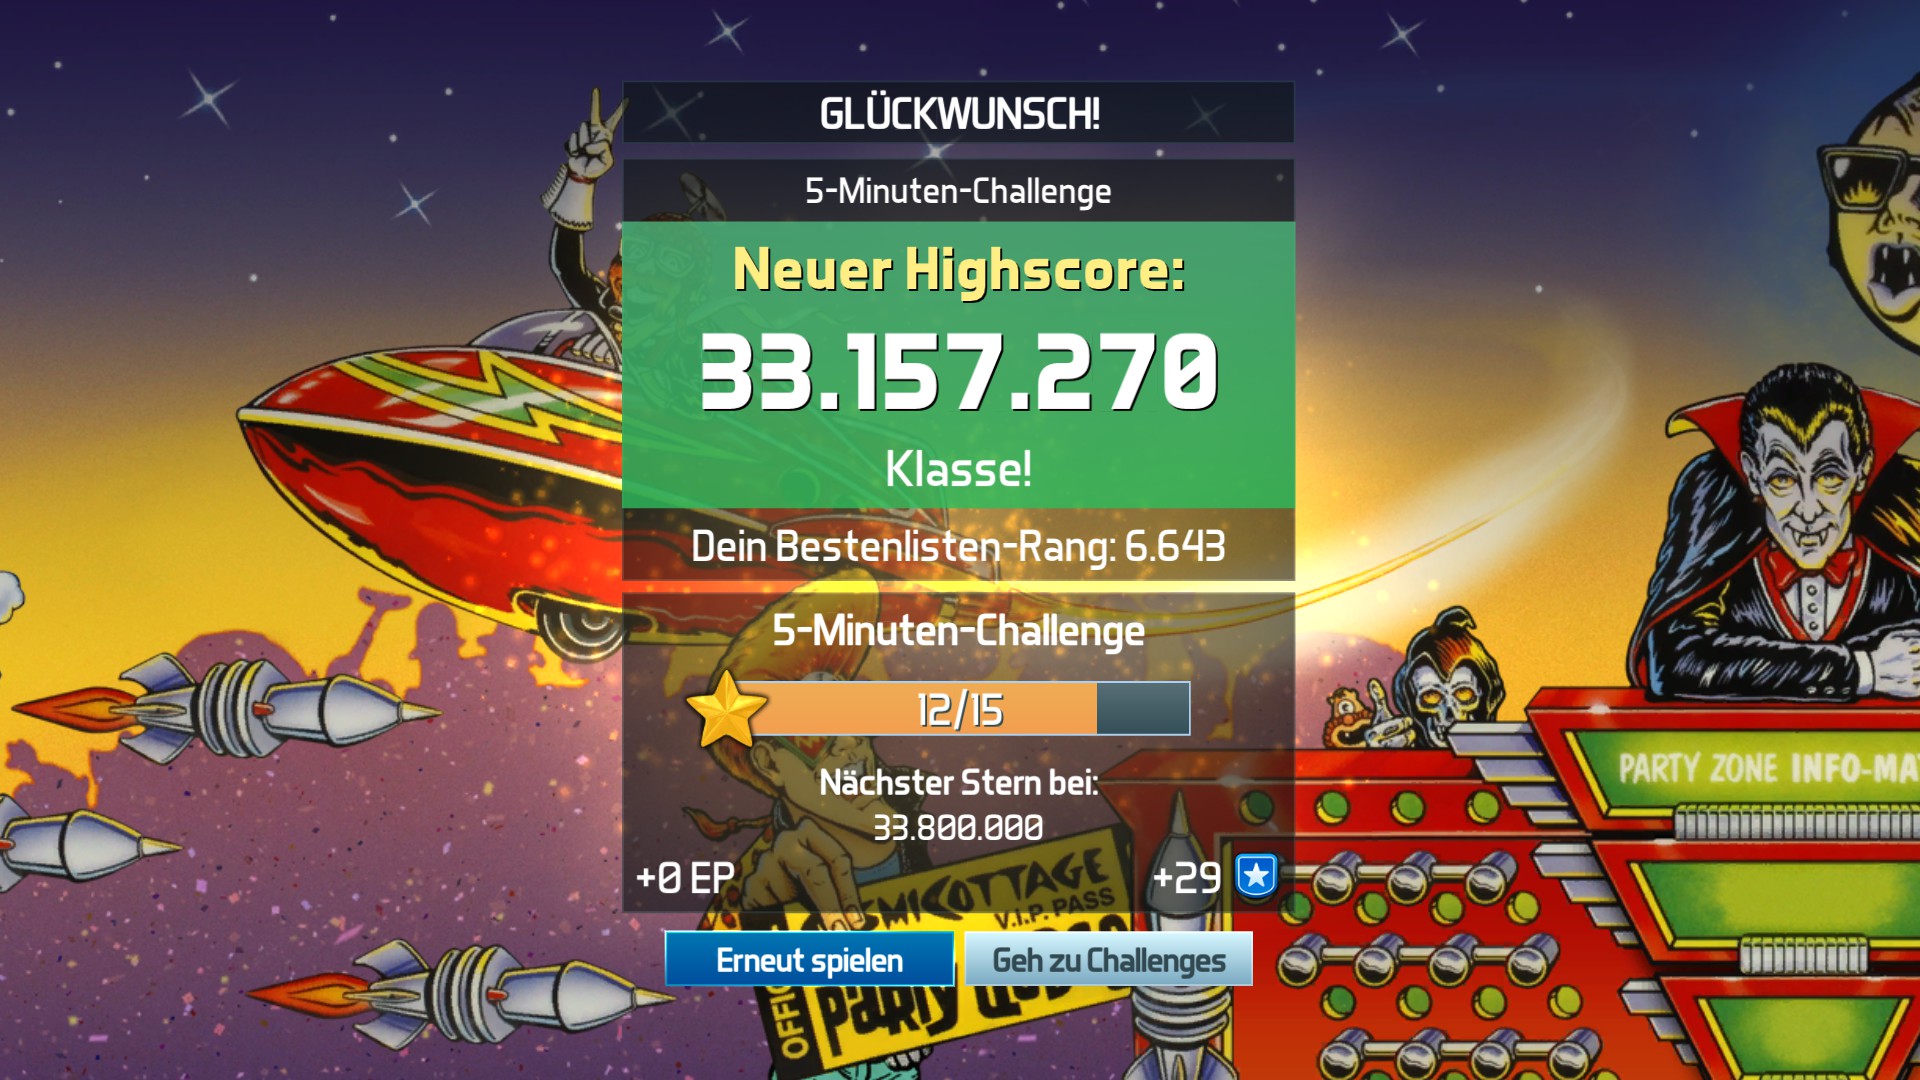 e2e4: Pinball FX3: The Party Zone [5 Minute] (PC) 33,157,270 points on 2022-09-21 22:11:17